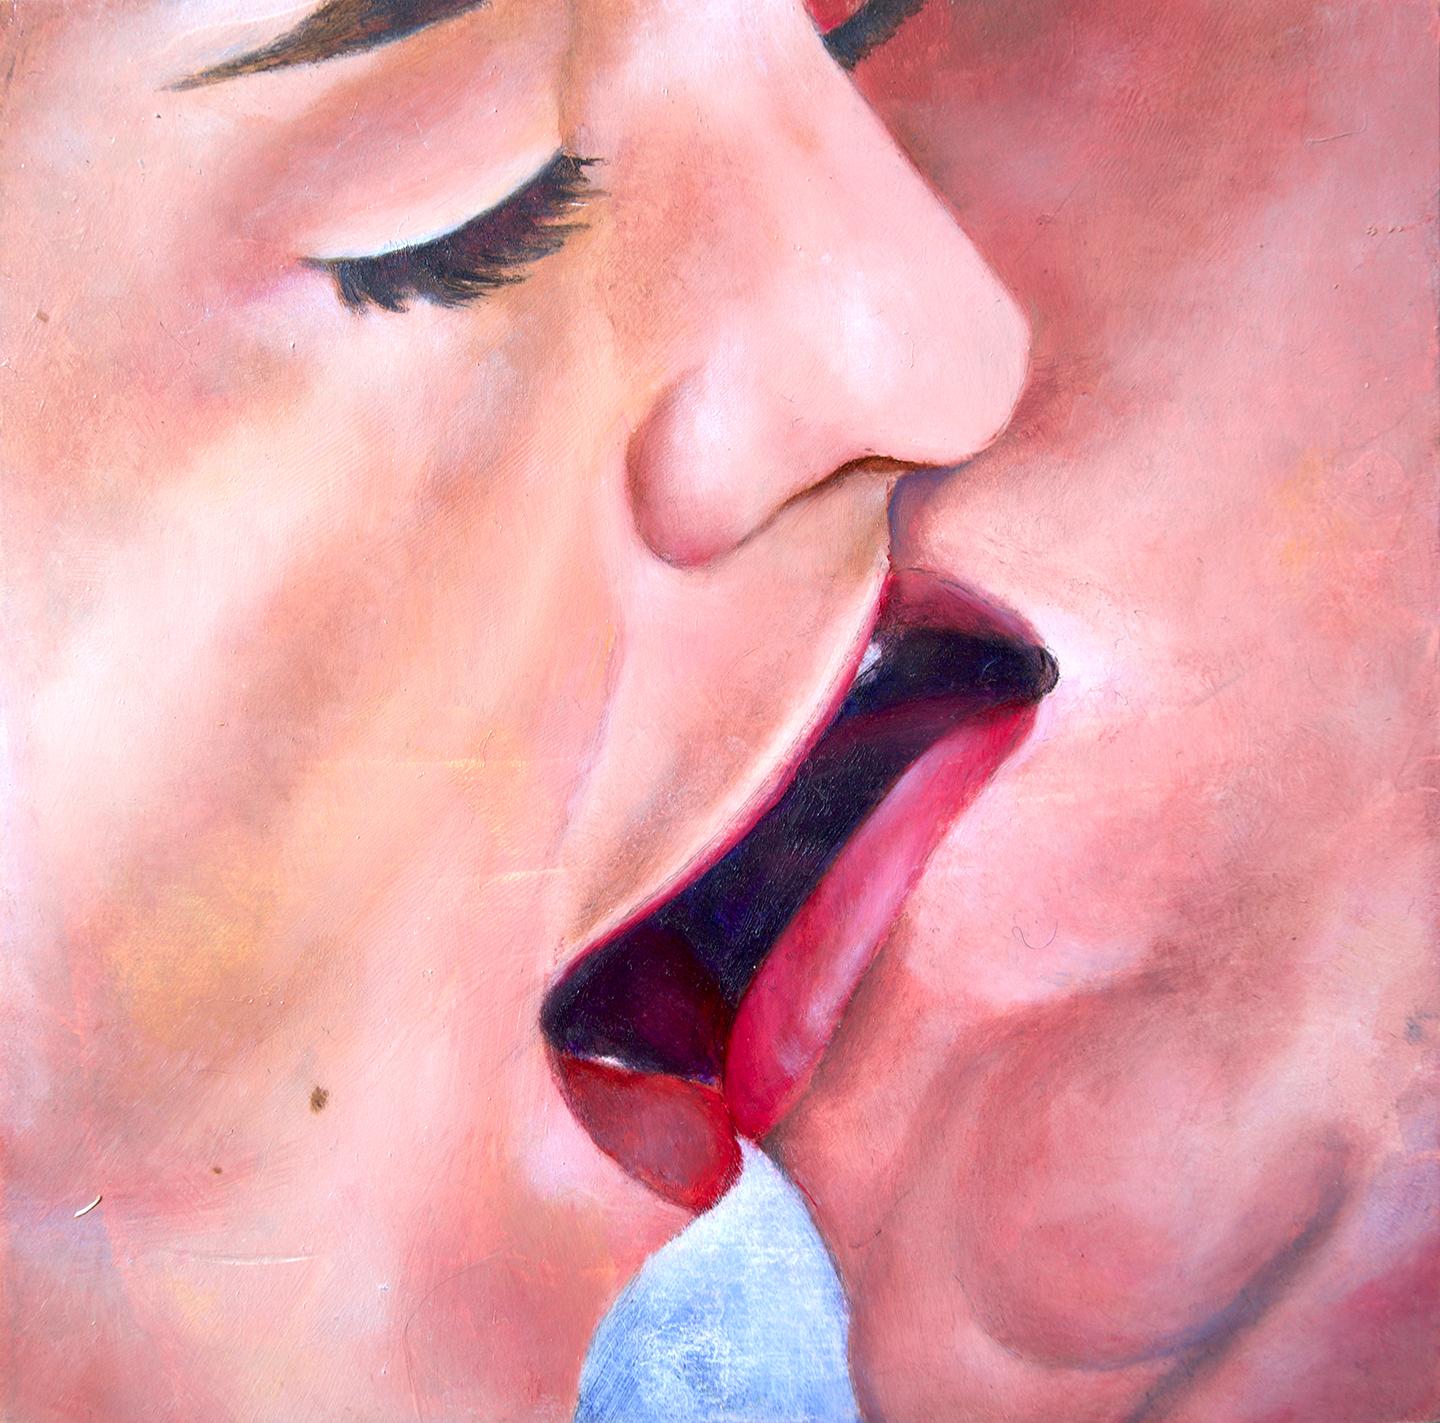 Rick Sindt Nude Painting - And Then Comes Wonder - Intimate Painting of a Couple Kissing